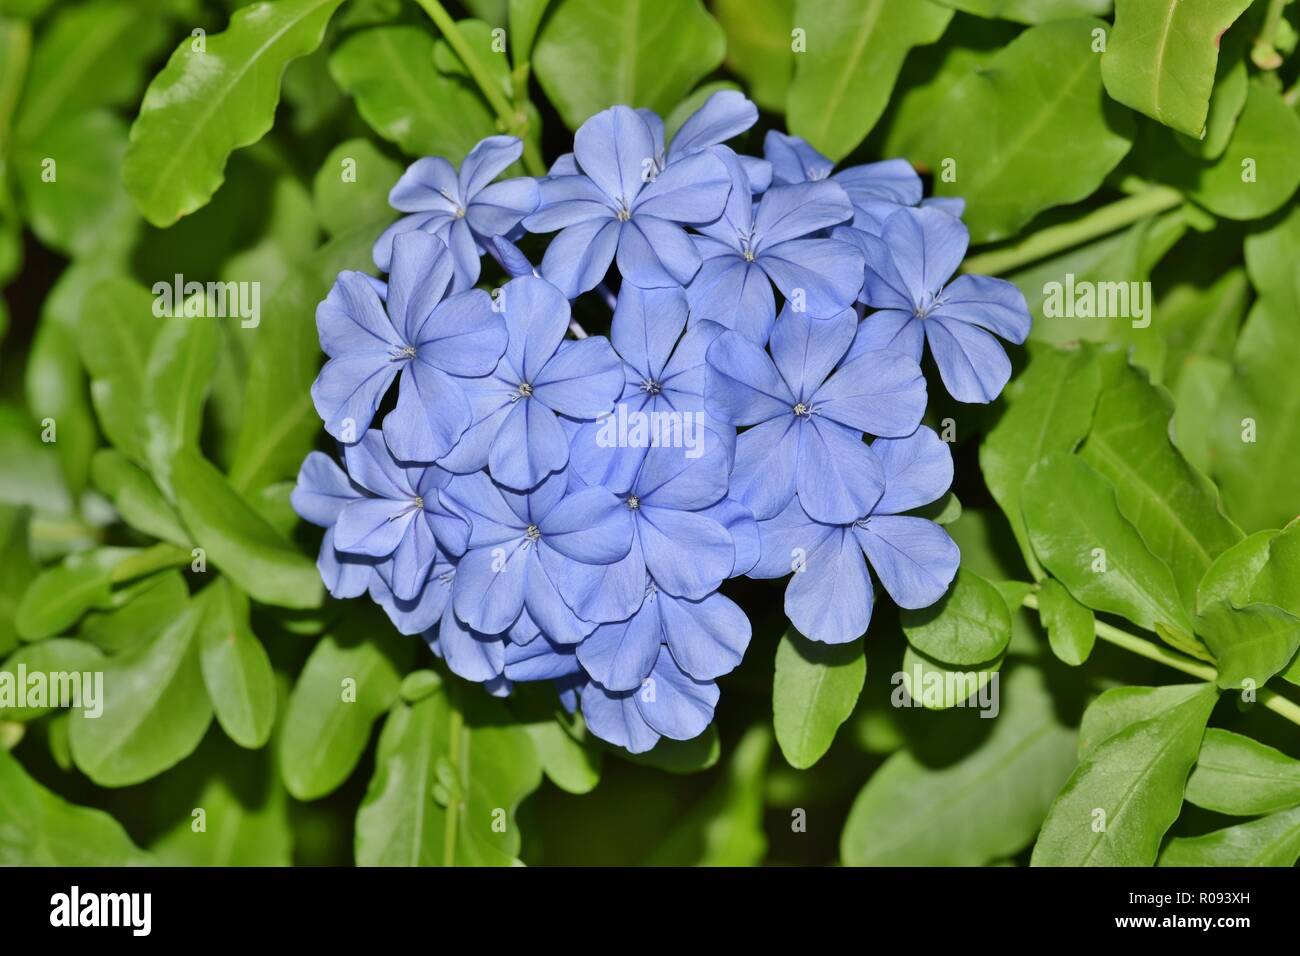 A flowering Blue Plumbago plant (Plumbago auriculata). A very popular evergreen shrub, they adorn many gardens. They look very attractive in blue. Stock Photo